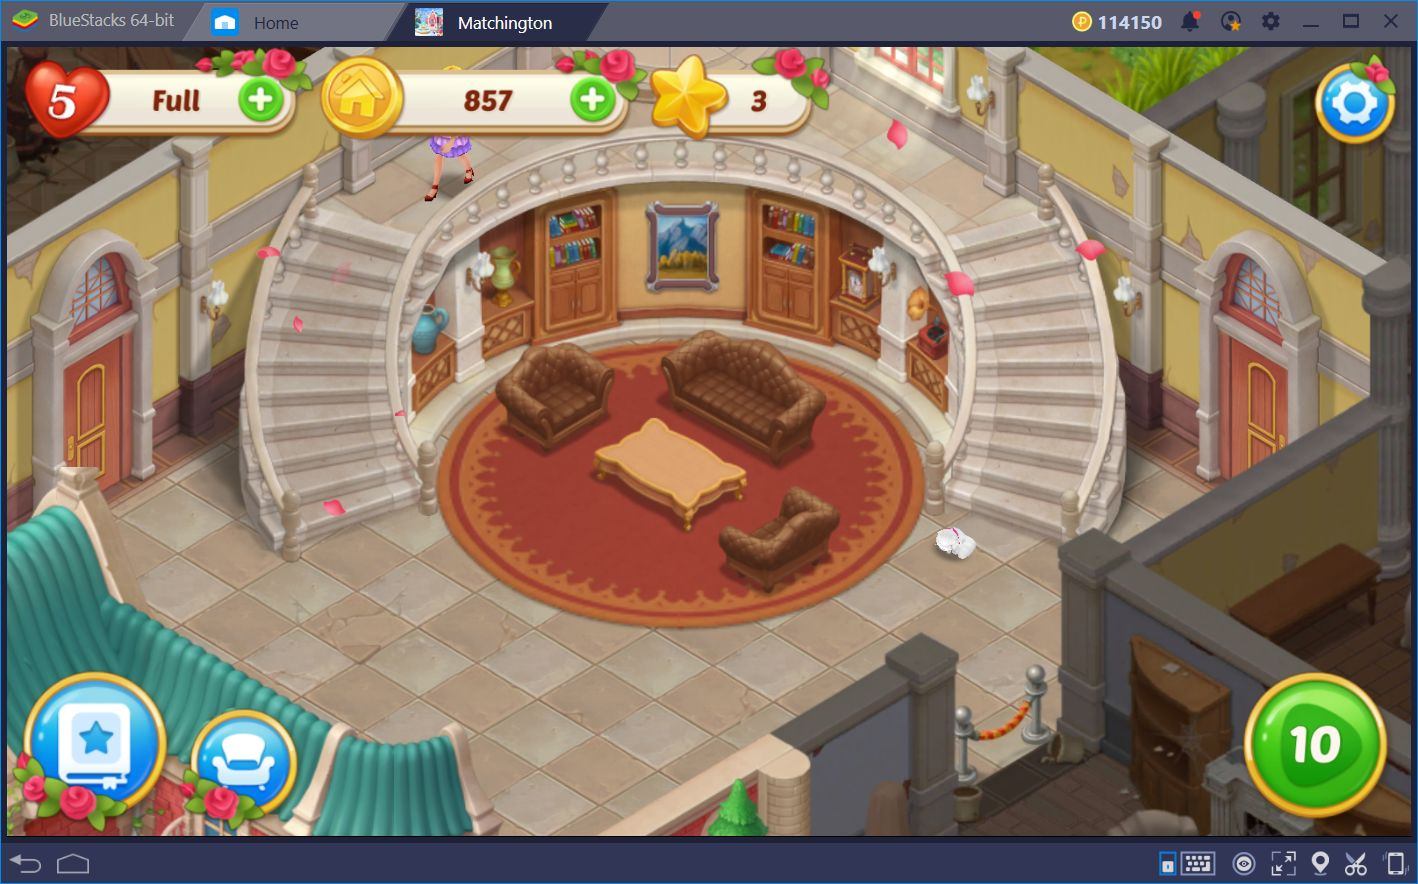 Matchington Mansion - How to Get Coins